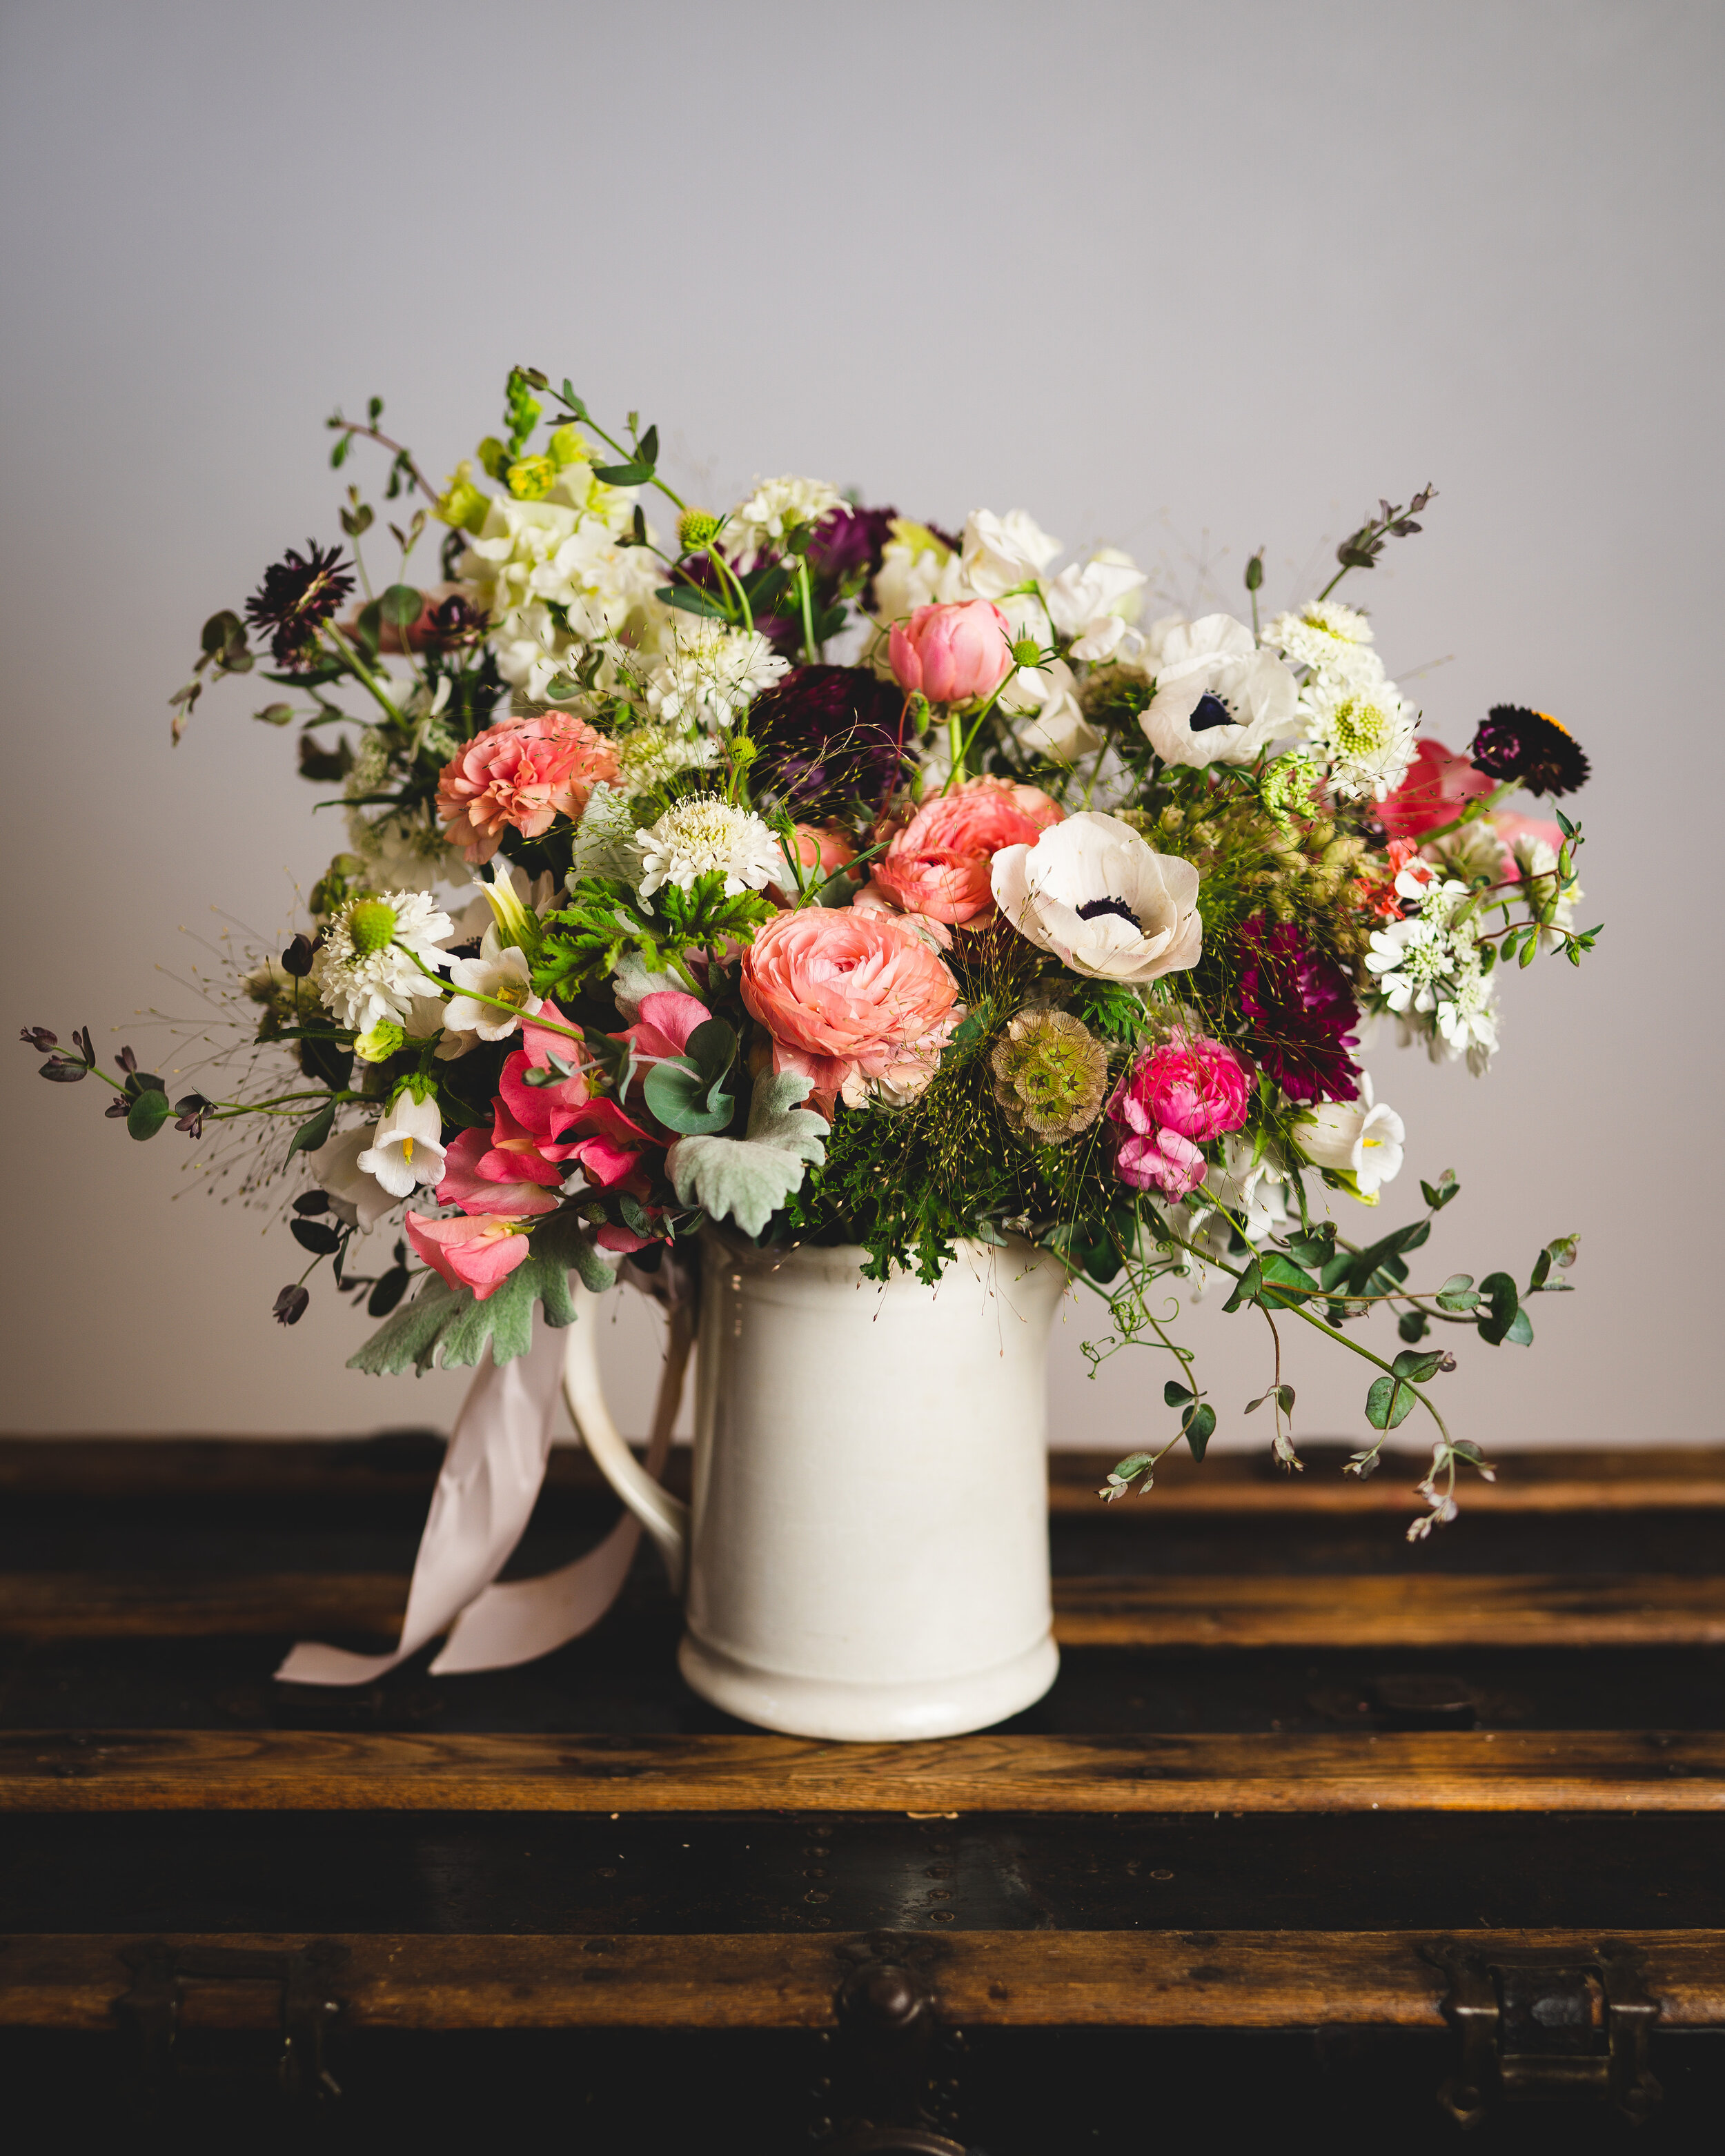 How to prepare flowers • woody stems • Photo Backdrops UK from Capture by  Lucy